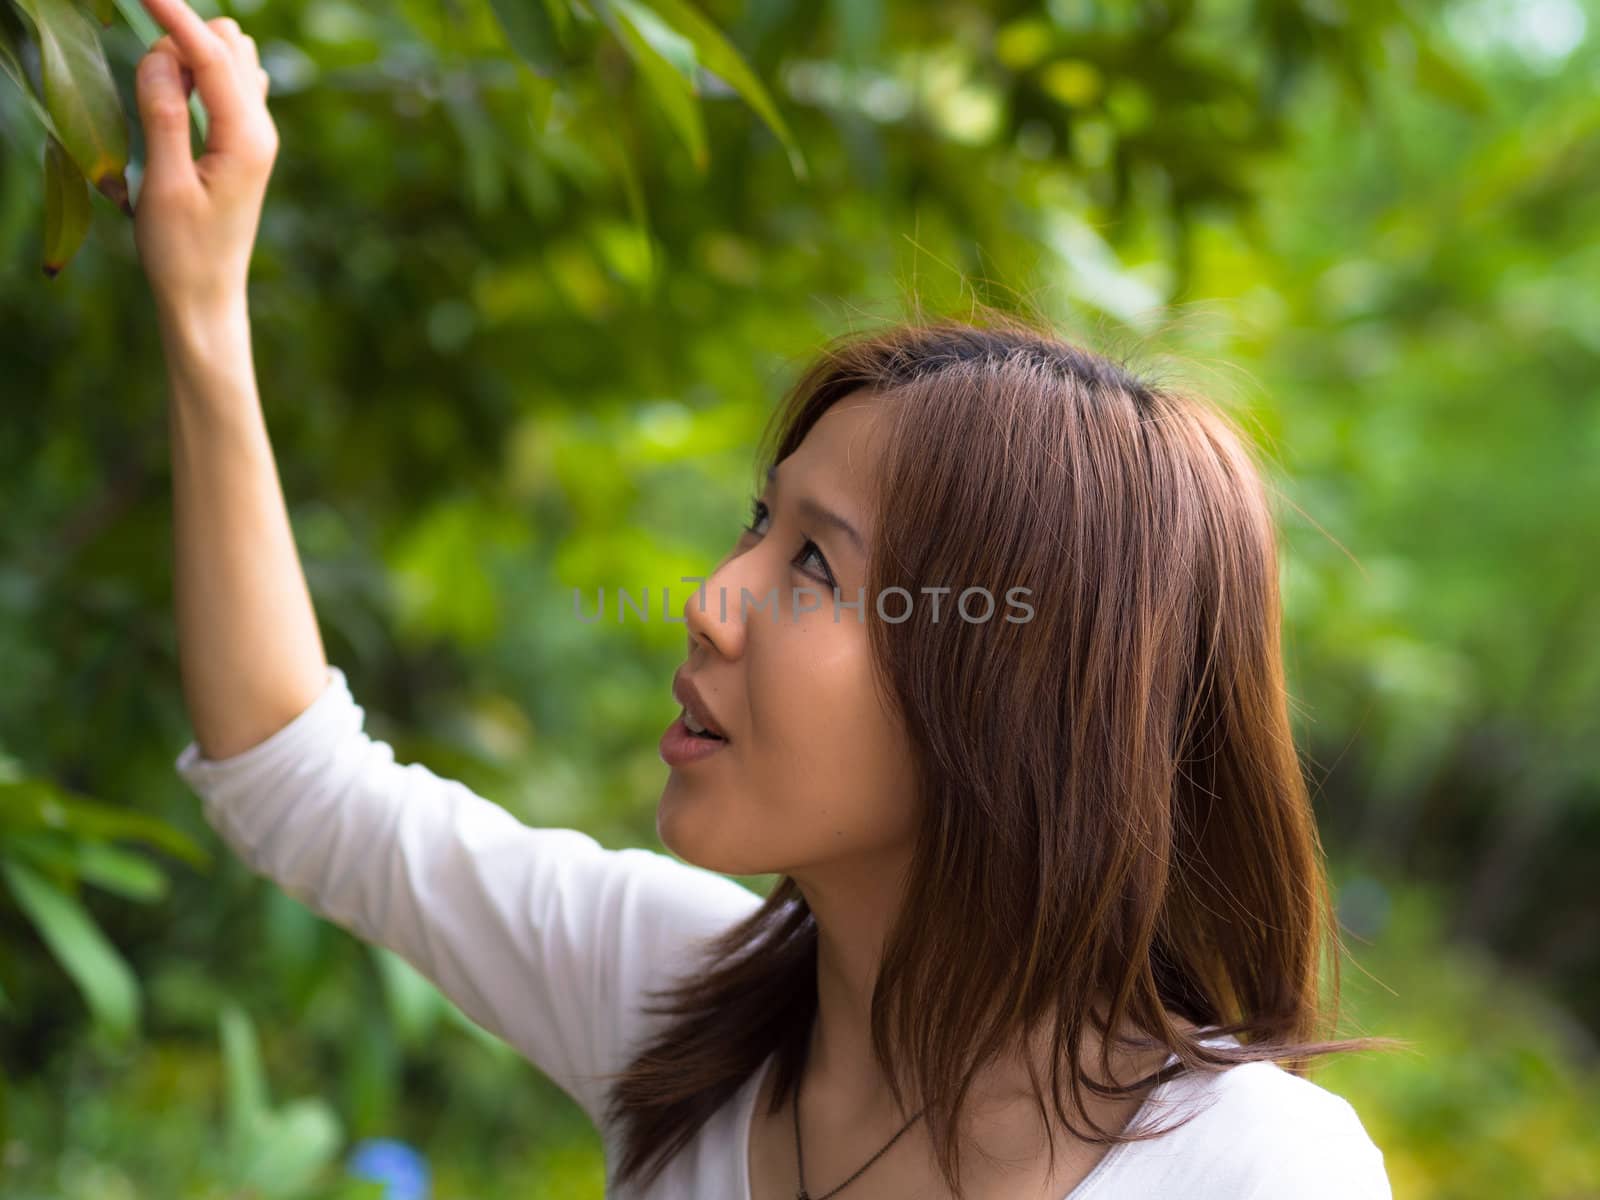 A young asian girl points out to something of interest on a leaf.